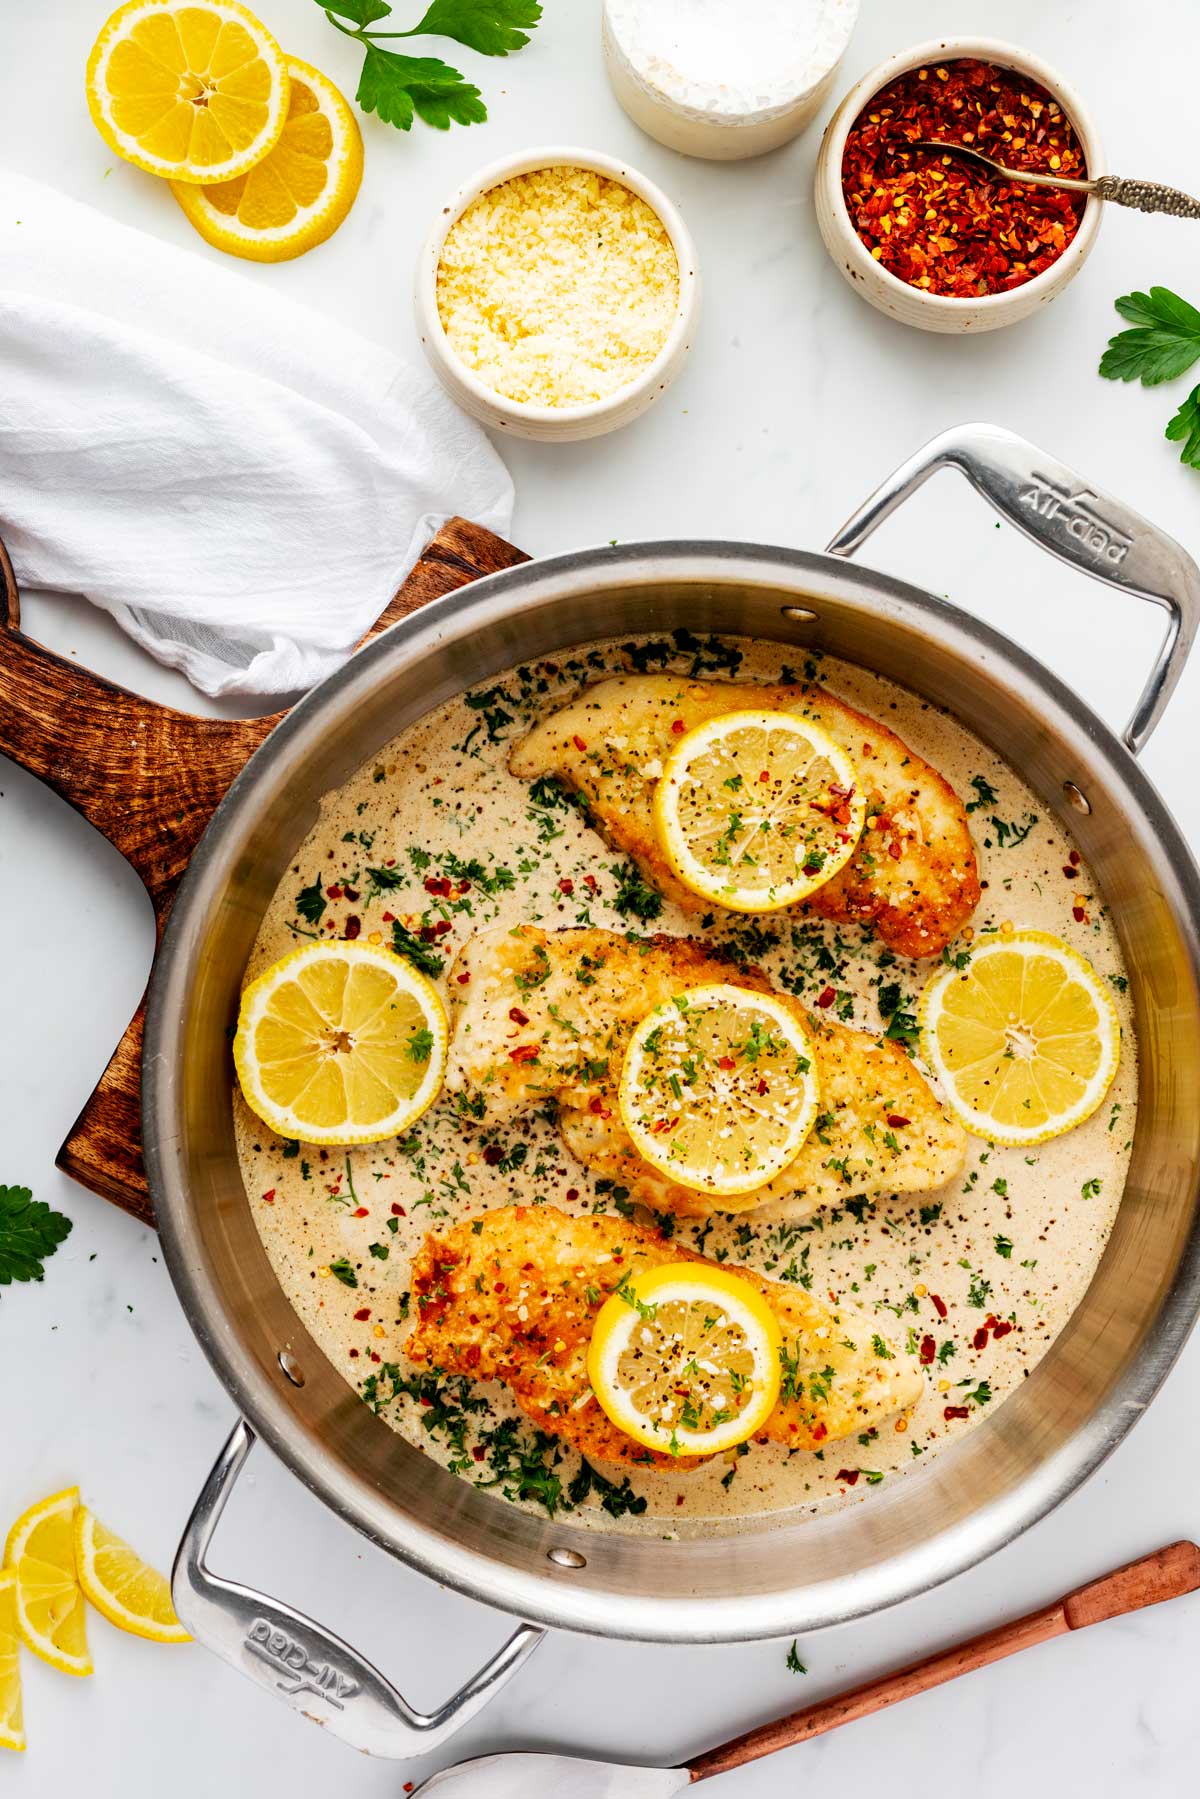 Photo of a skillet with lemon pepper chicken garnished with lemons, parsley, and red pepper flakes.